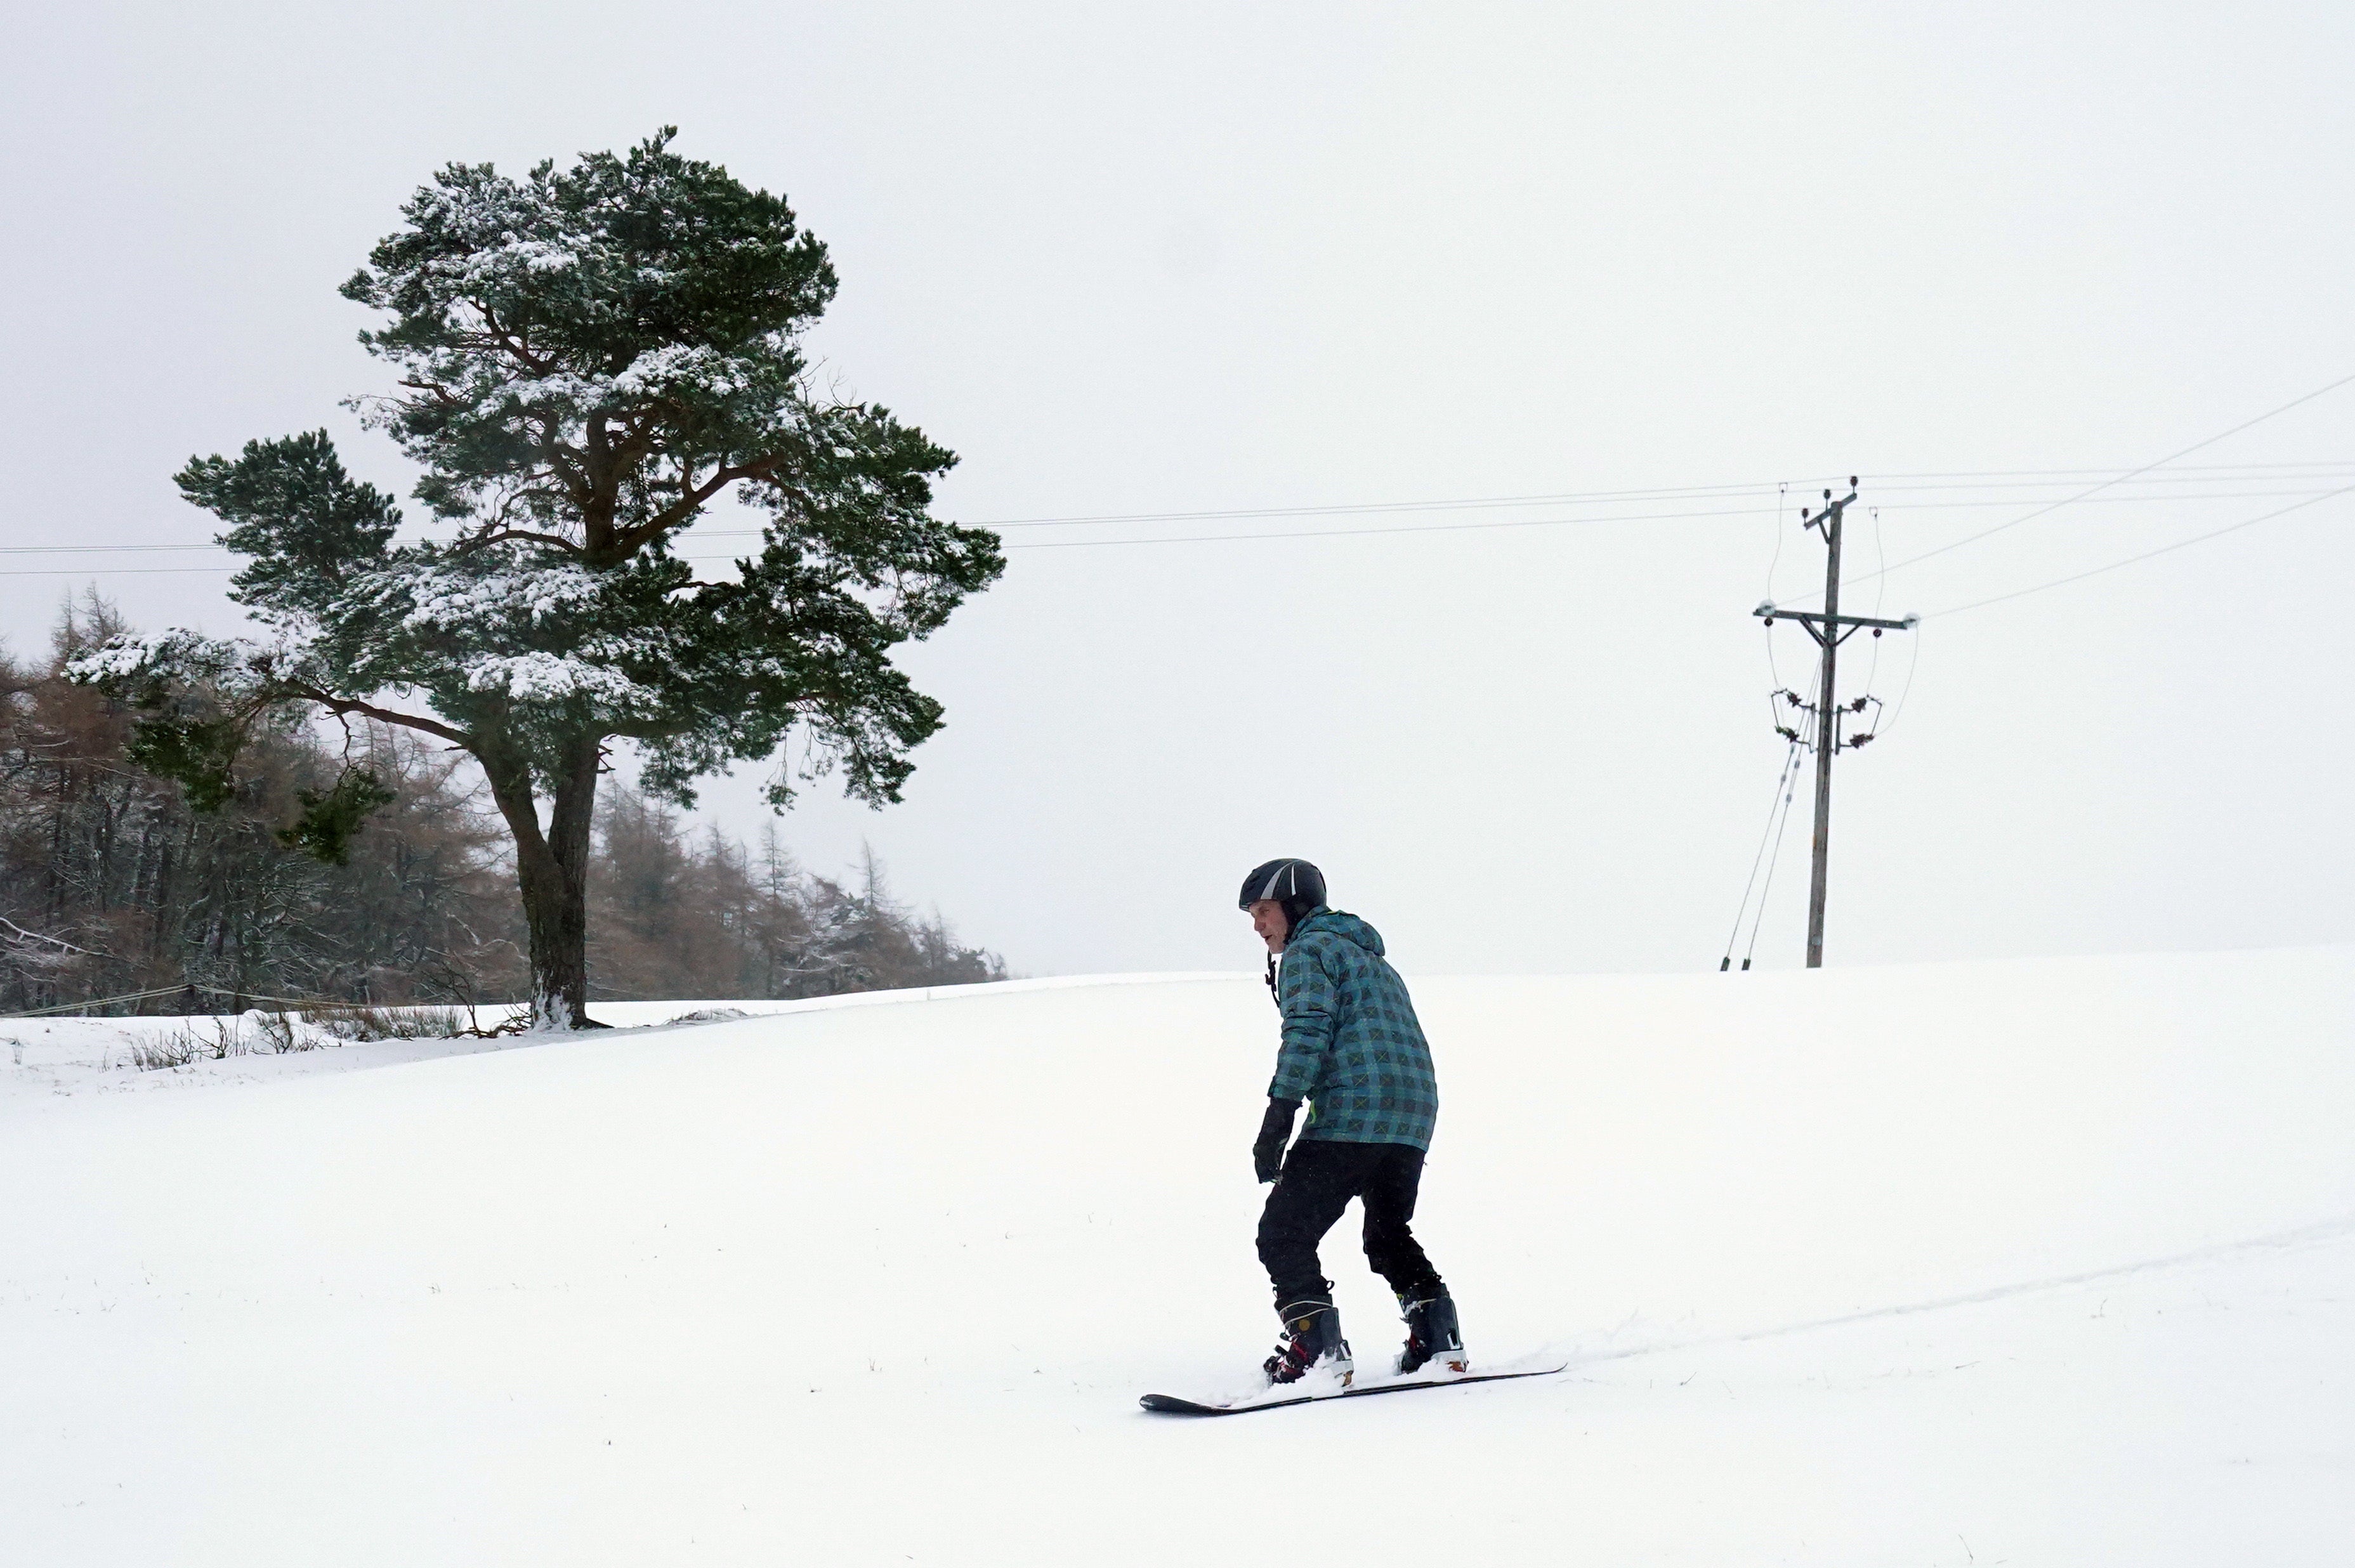 A snow boarder in Allenheads, Northumberland